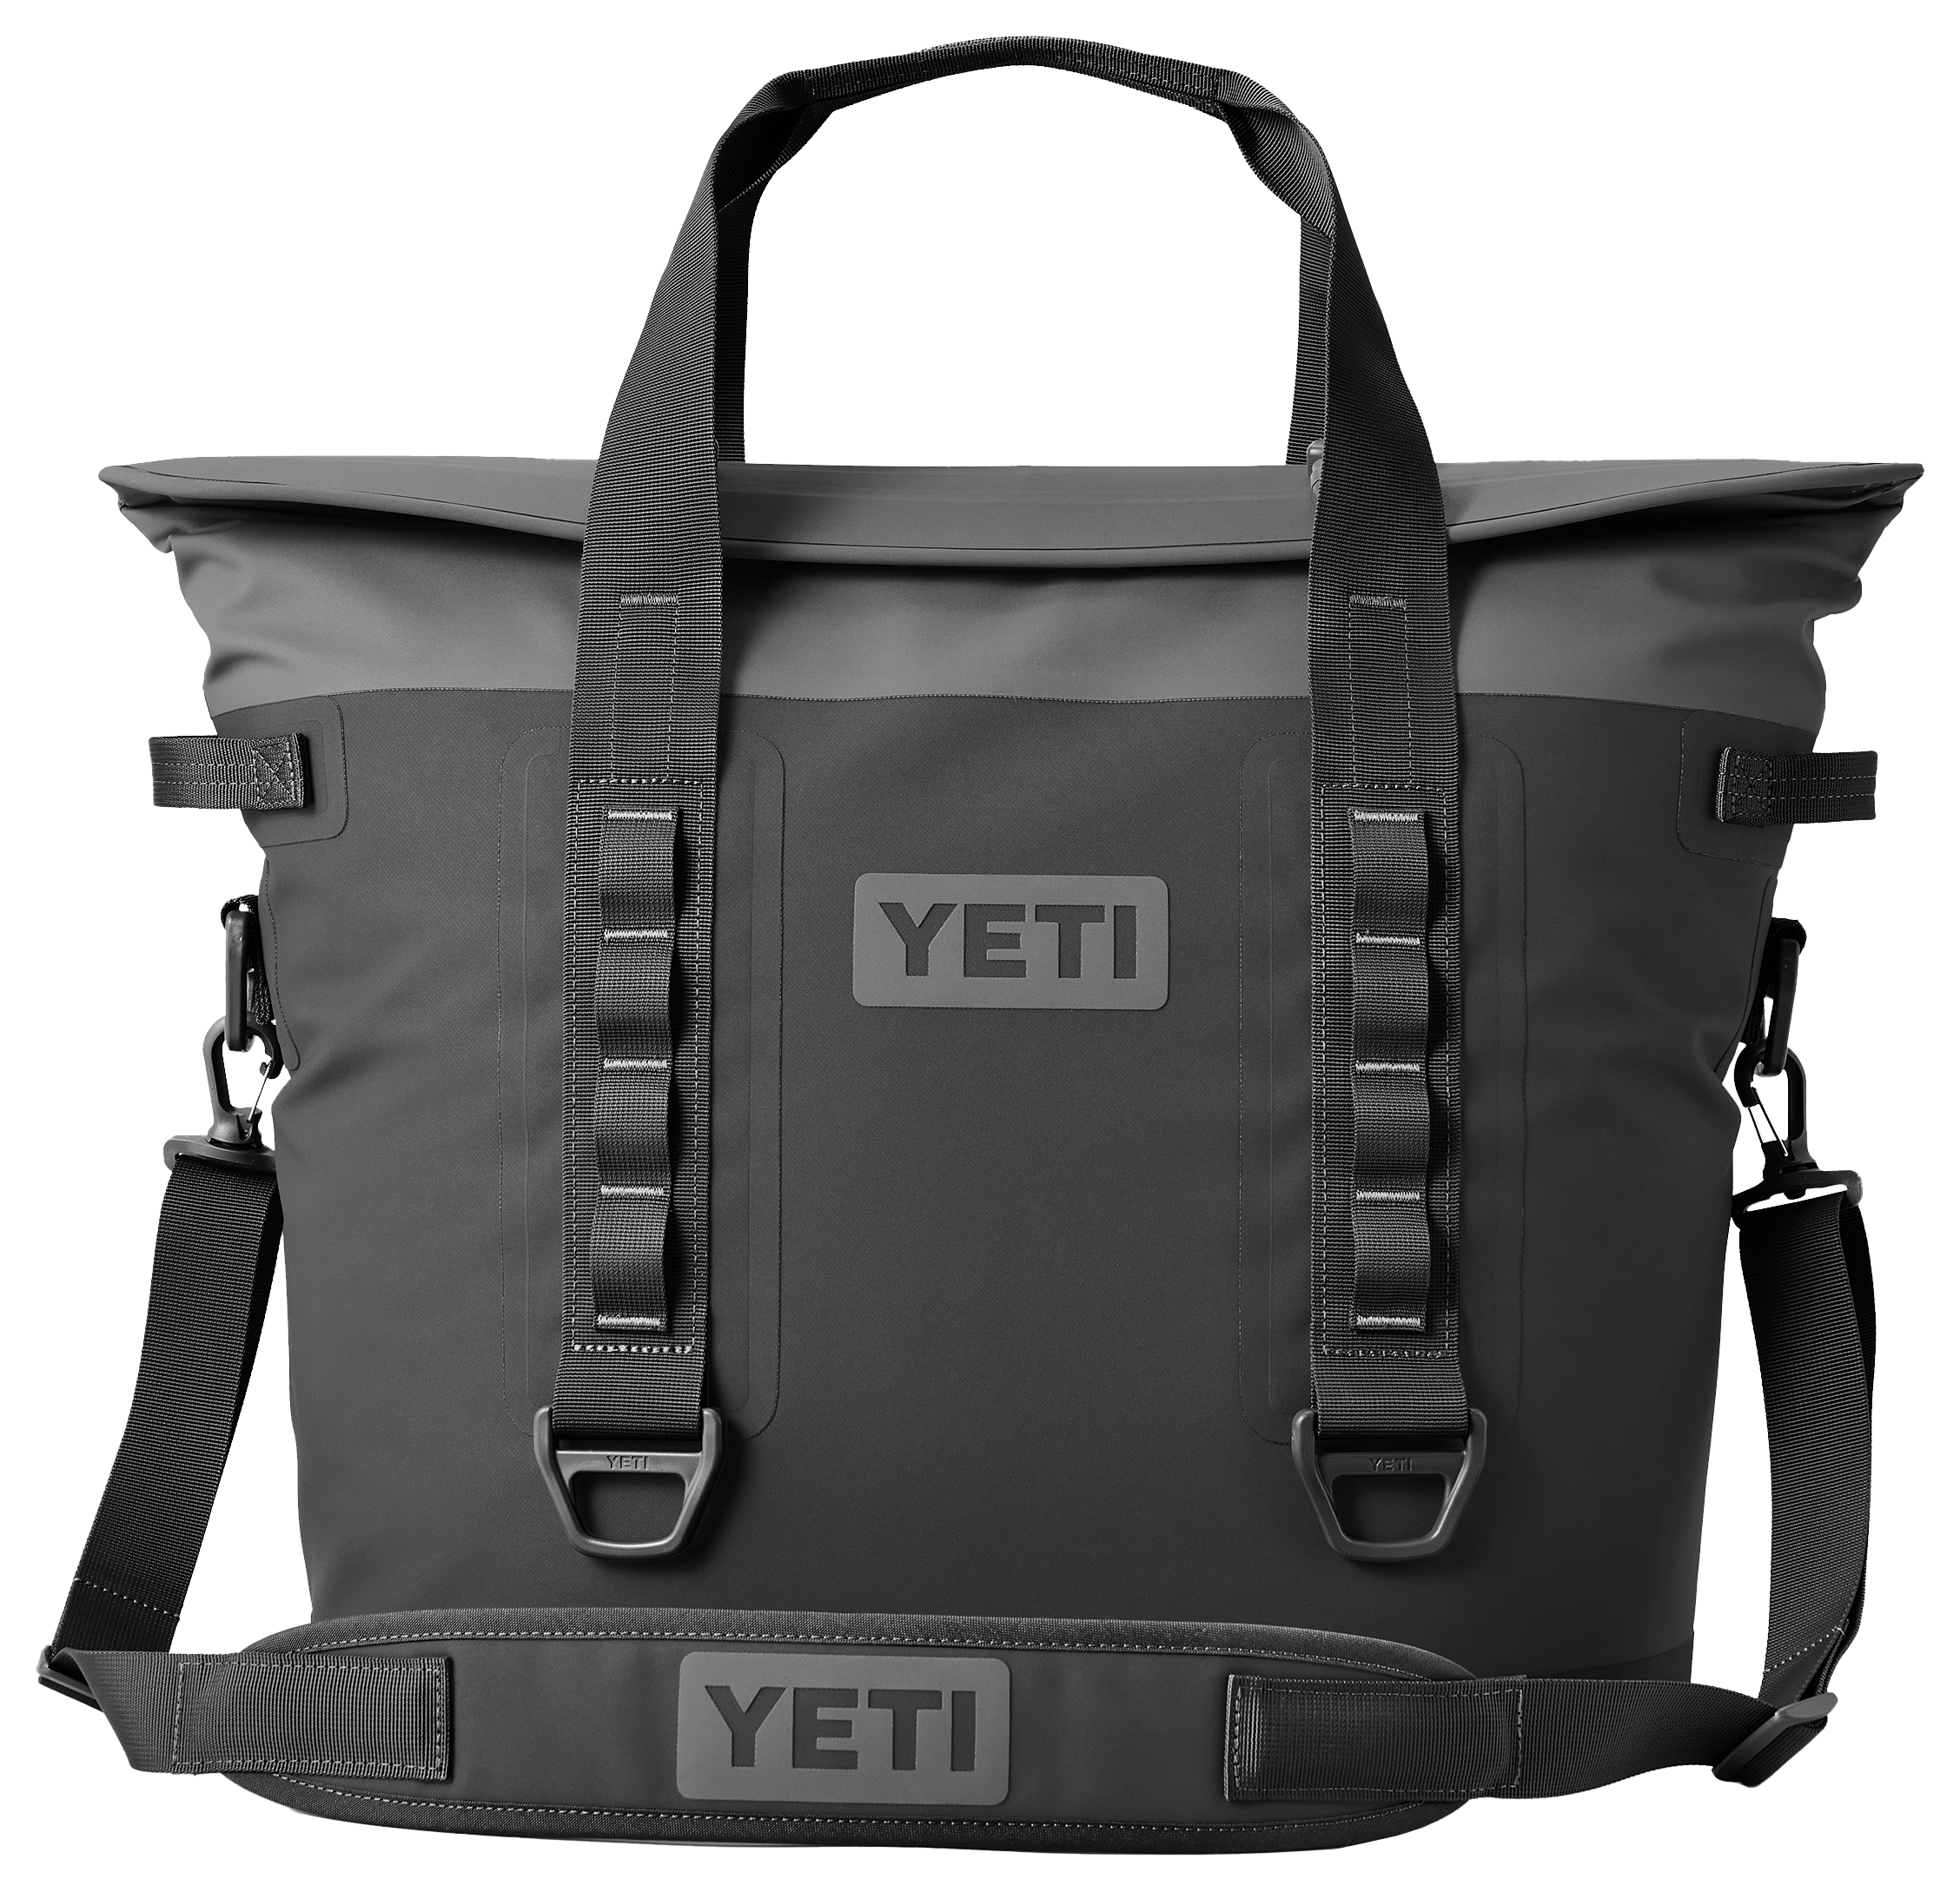 Bass Pro Shops - Keeping it cold or keeping it hot. Yeti is on sale,  believe it or not!